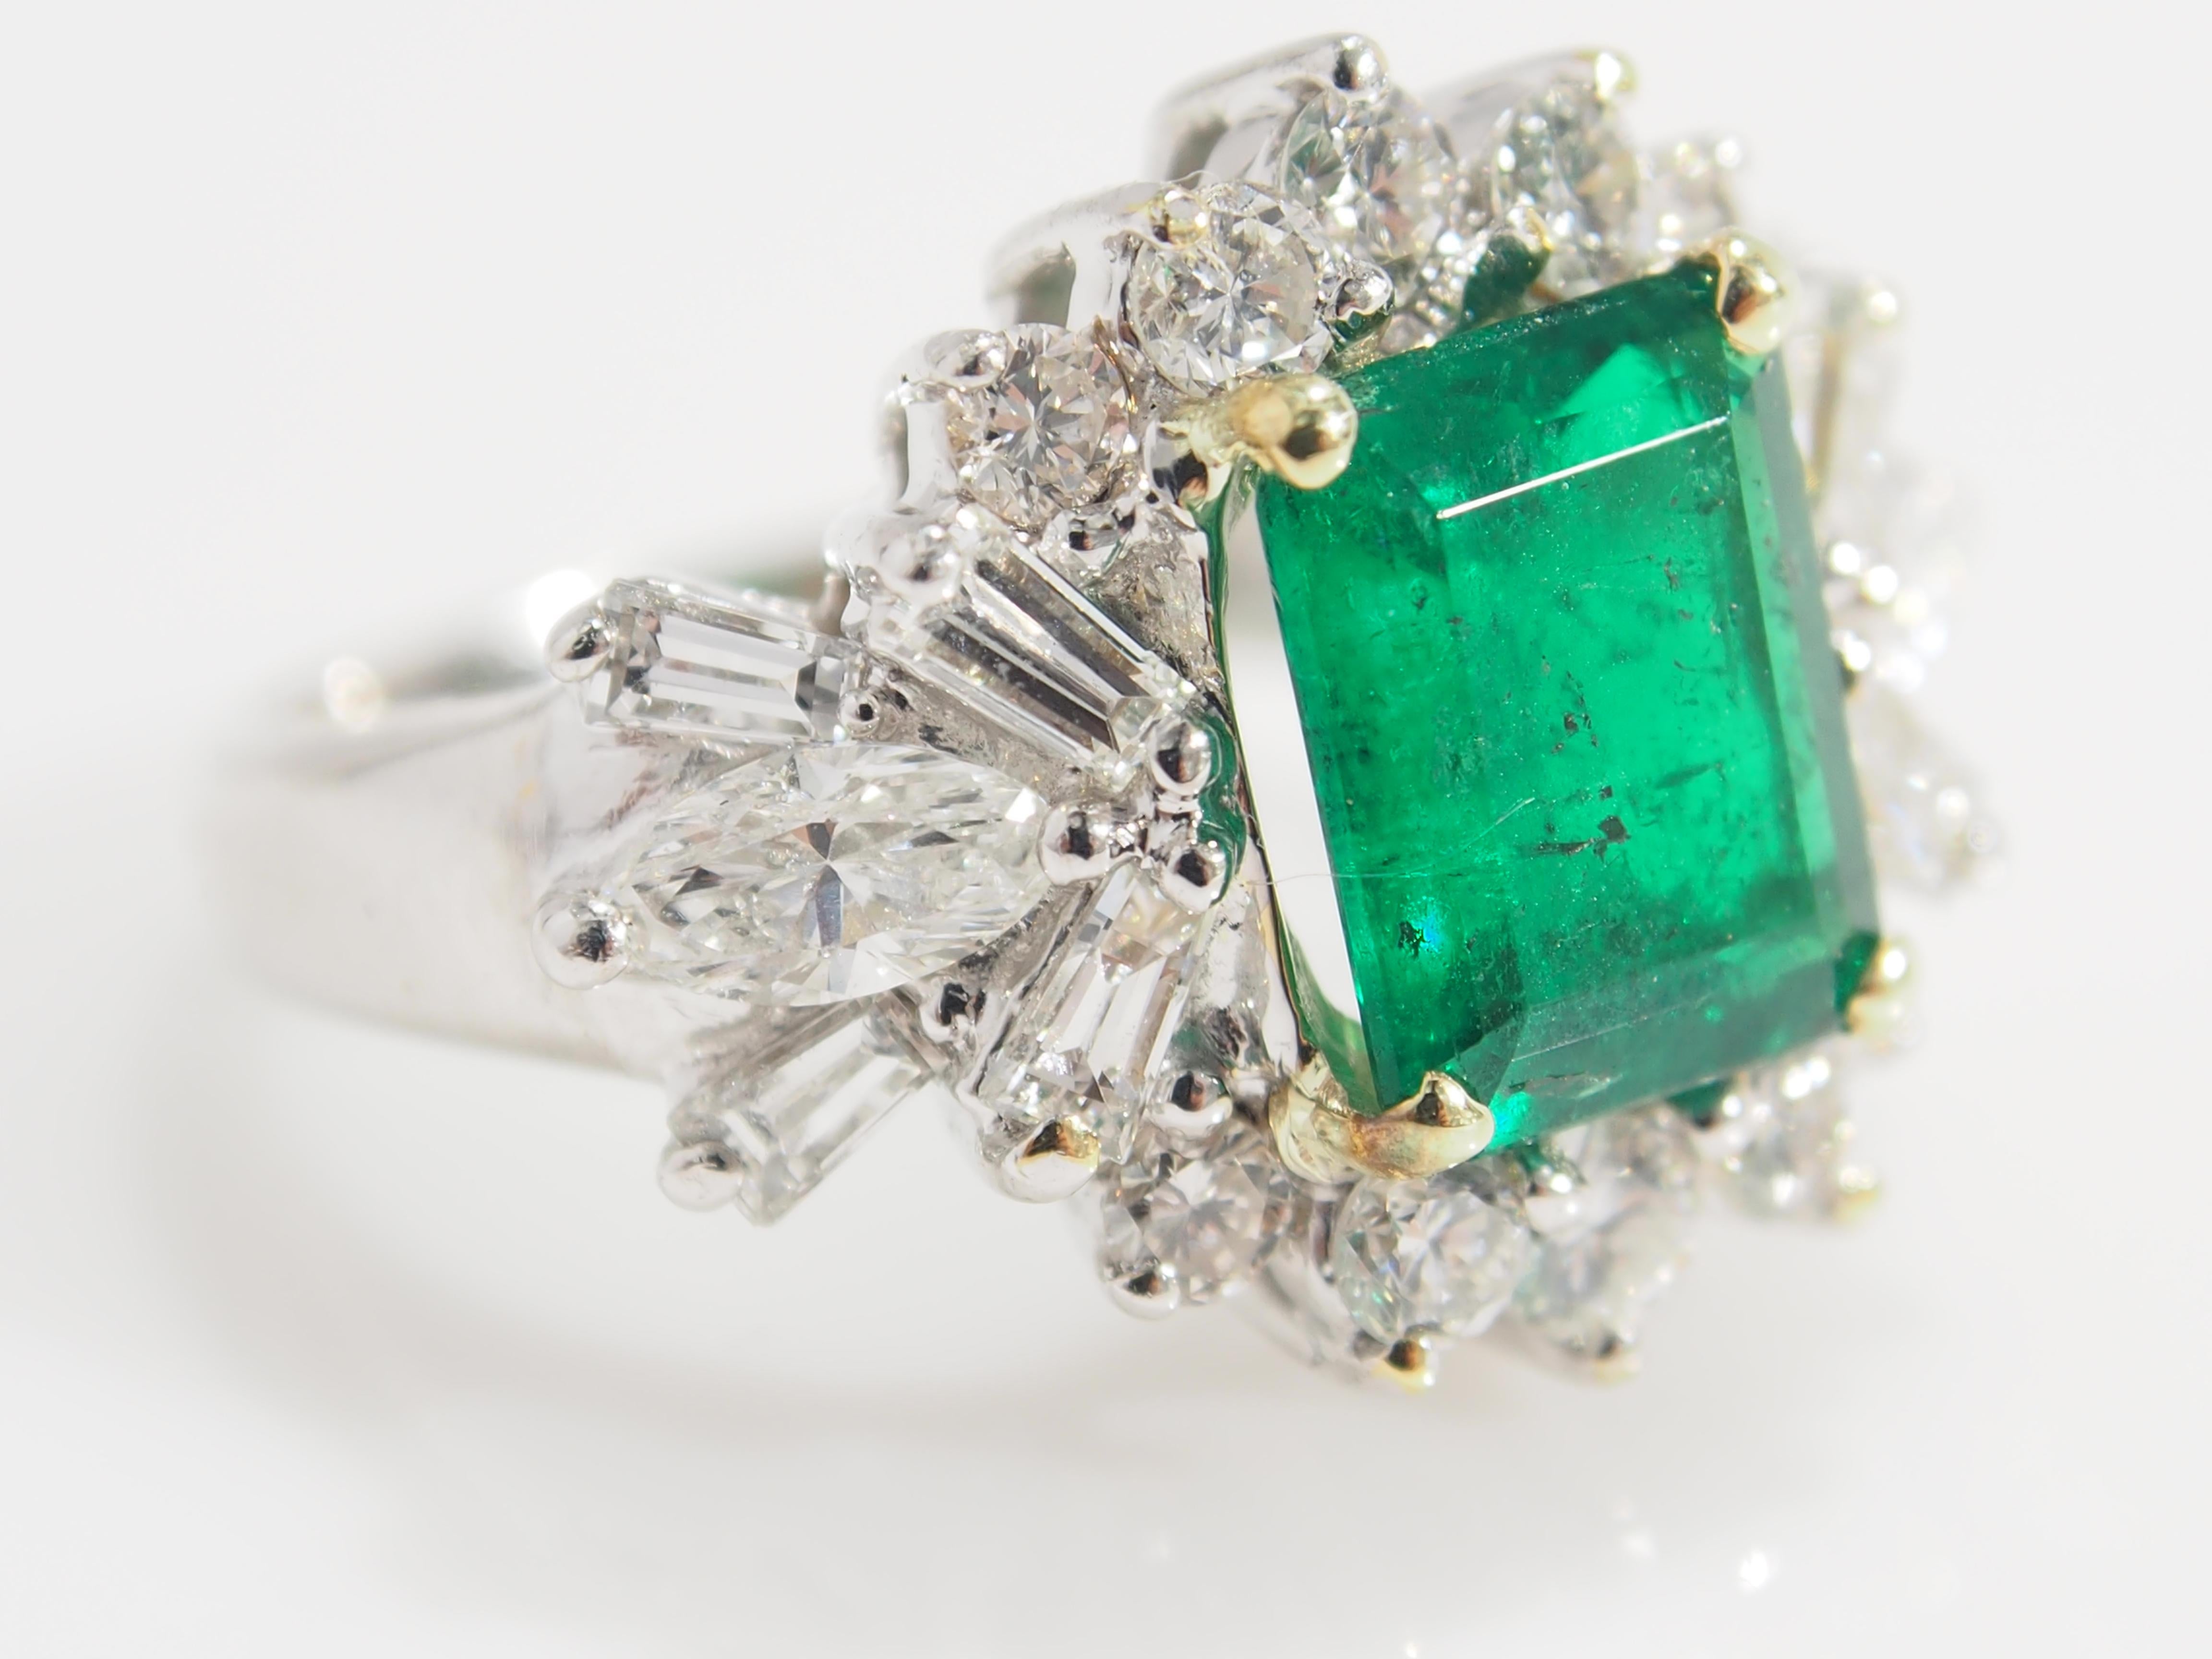 This is an alluring 18K White Gold Diamond and Emerald Ring which measures 3/4 inch in length and 1/2 inch in width. A lustrous Diamond Cluster designed with (2) Marquise Diamonds, (8) Baguettes and (10) Round Brilliant Cut Diamonds for an